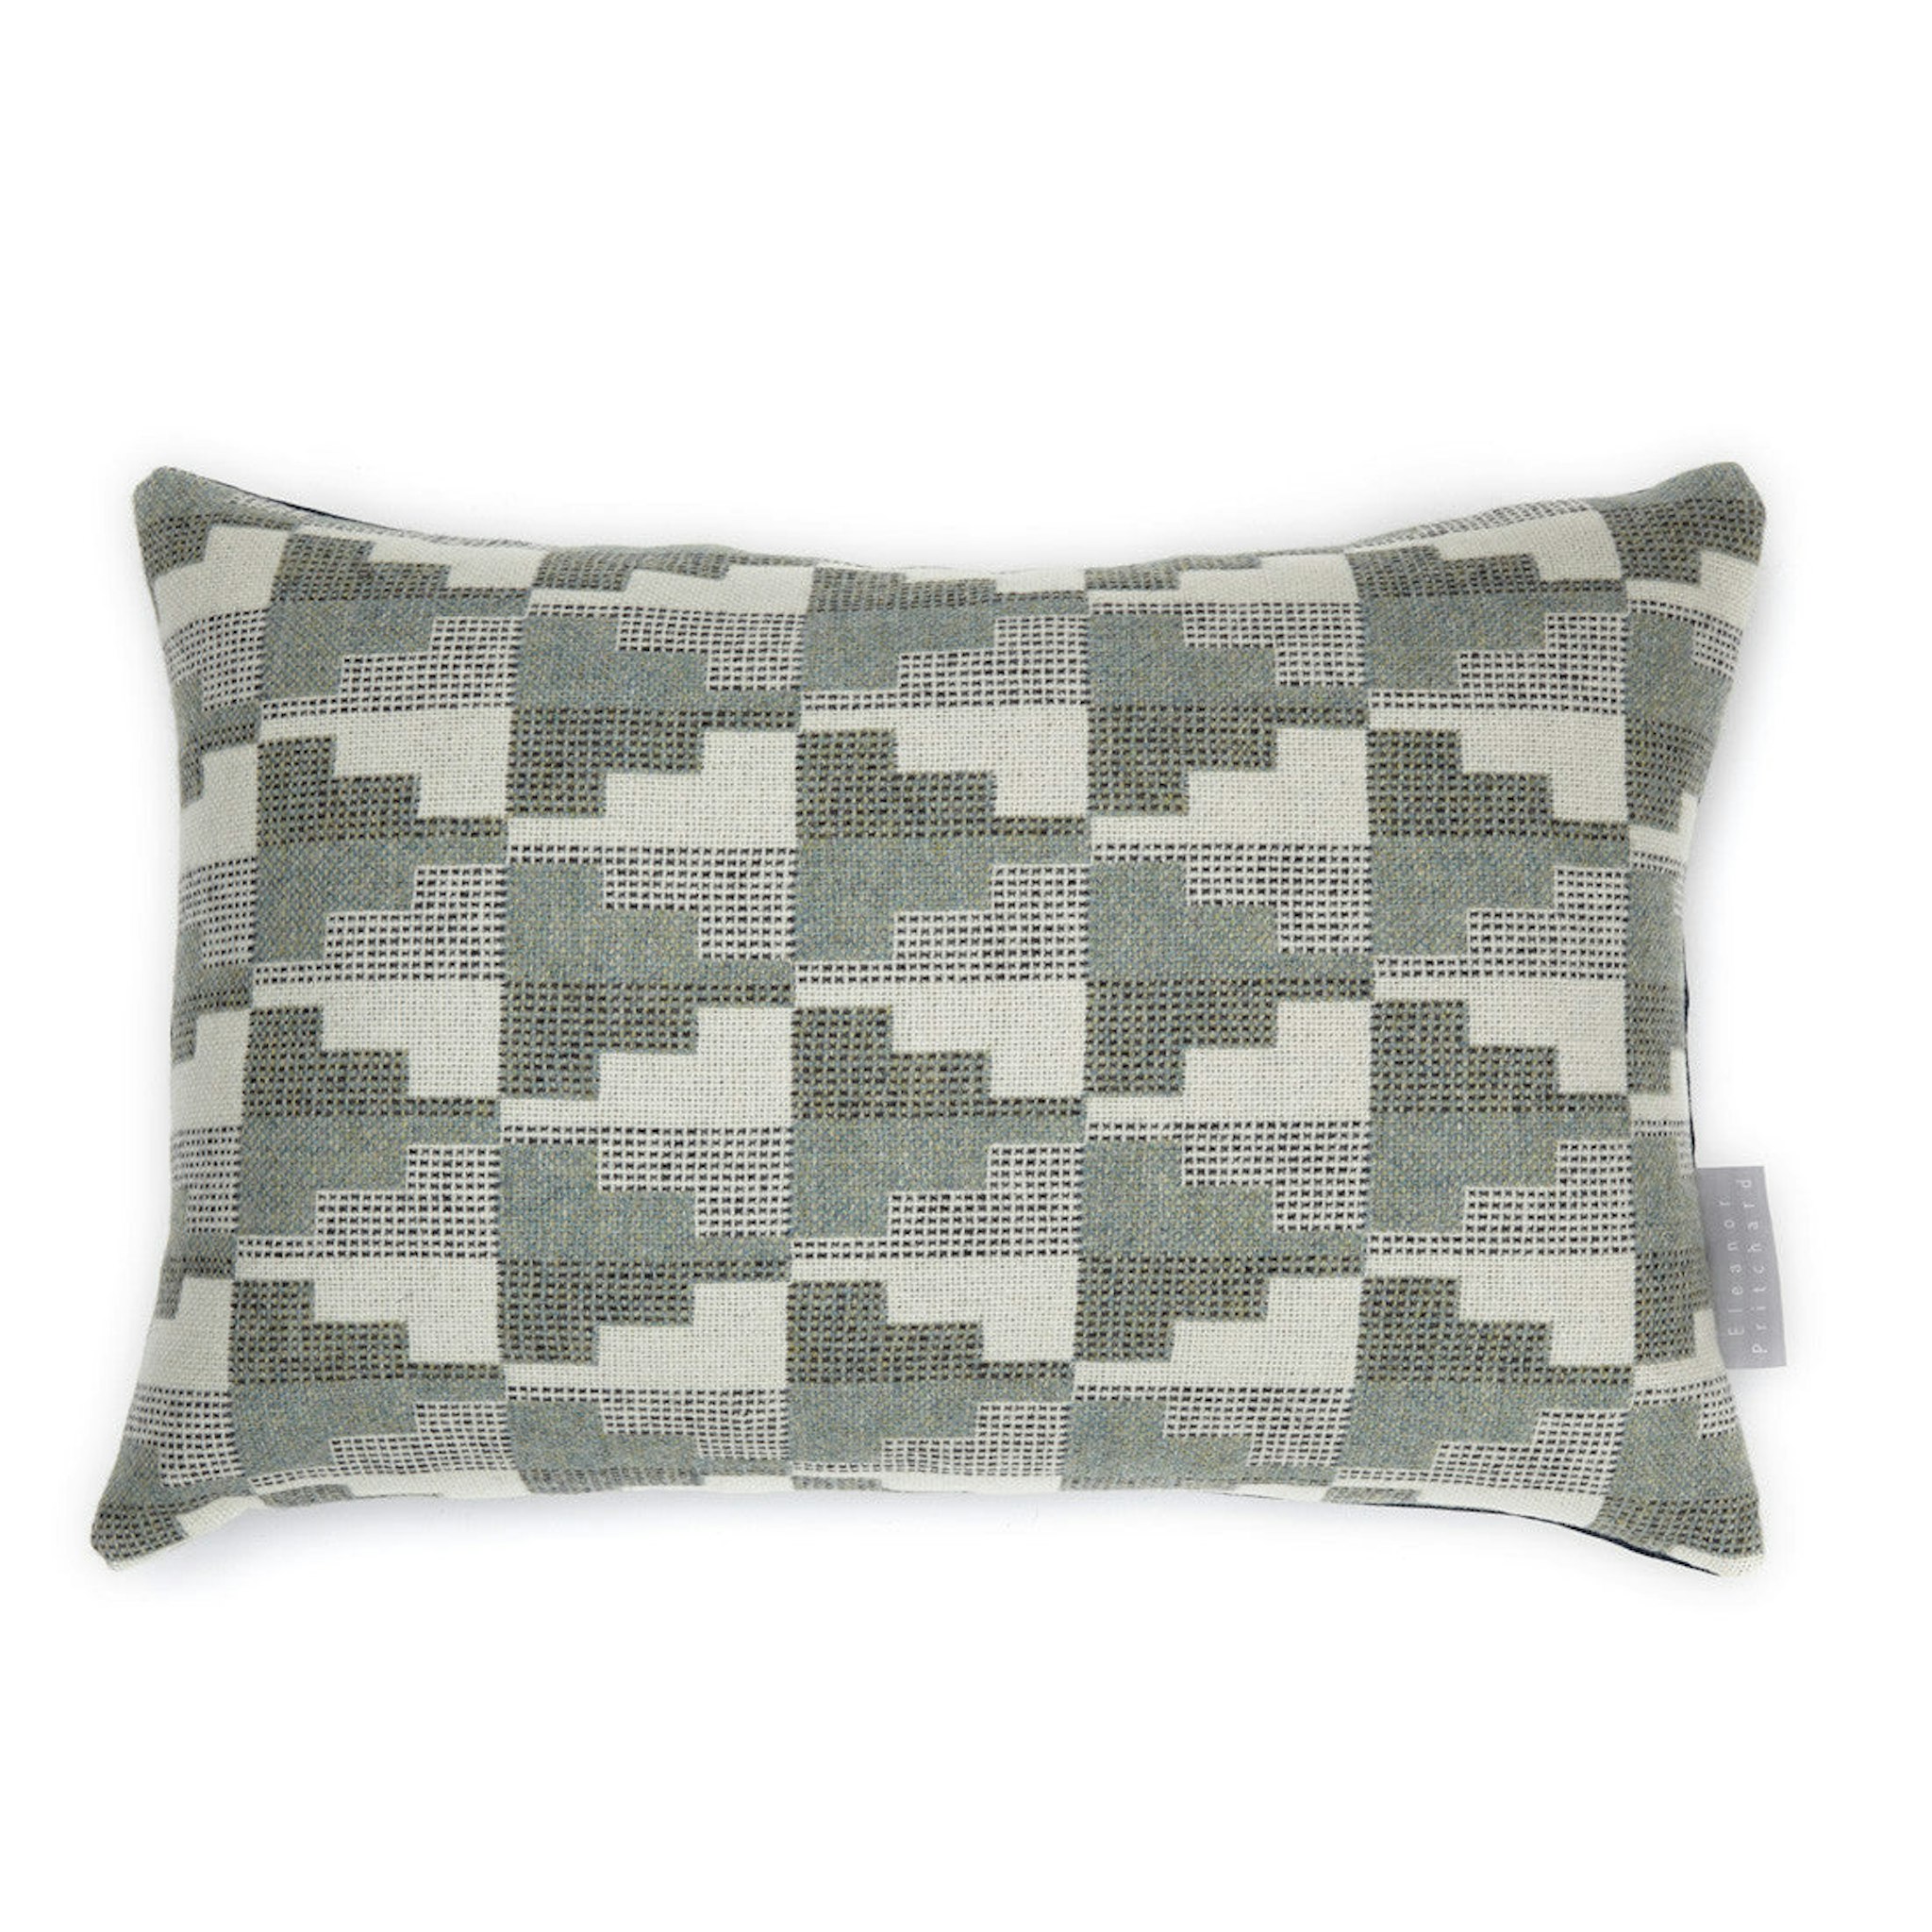 Northerly cushion by Eleanor Pritchard